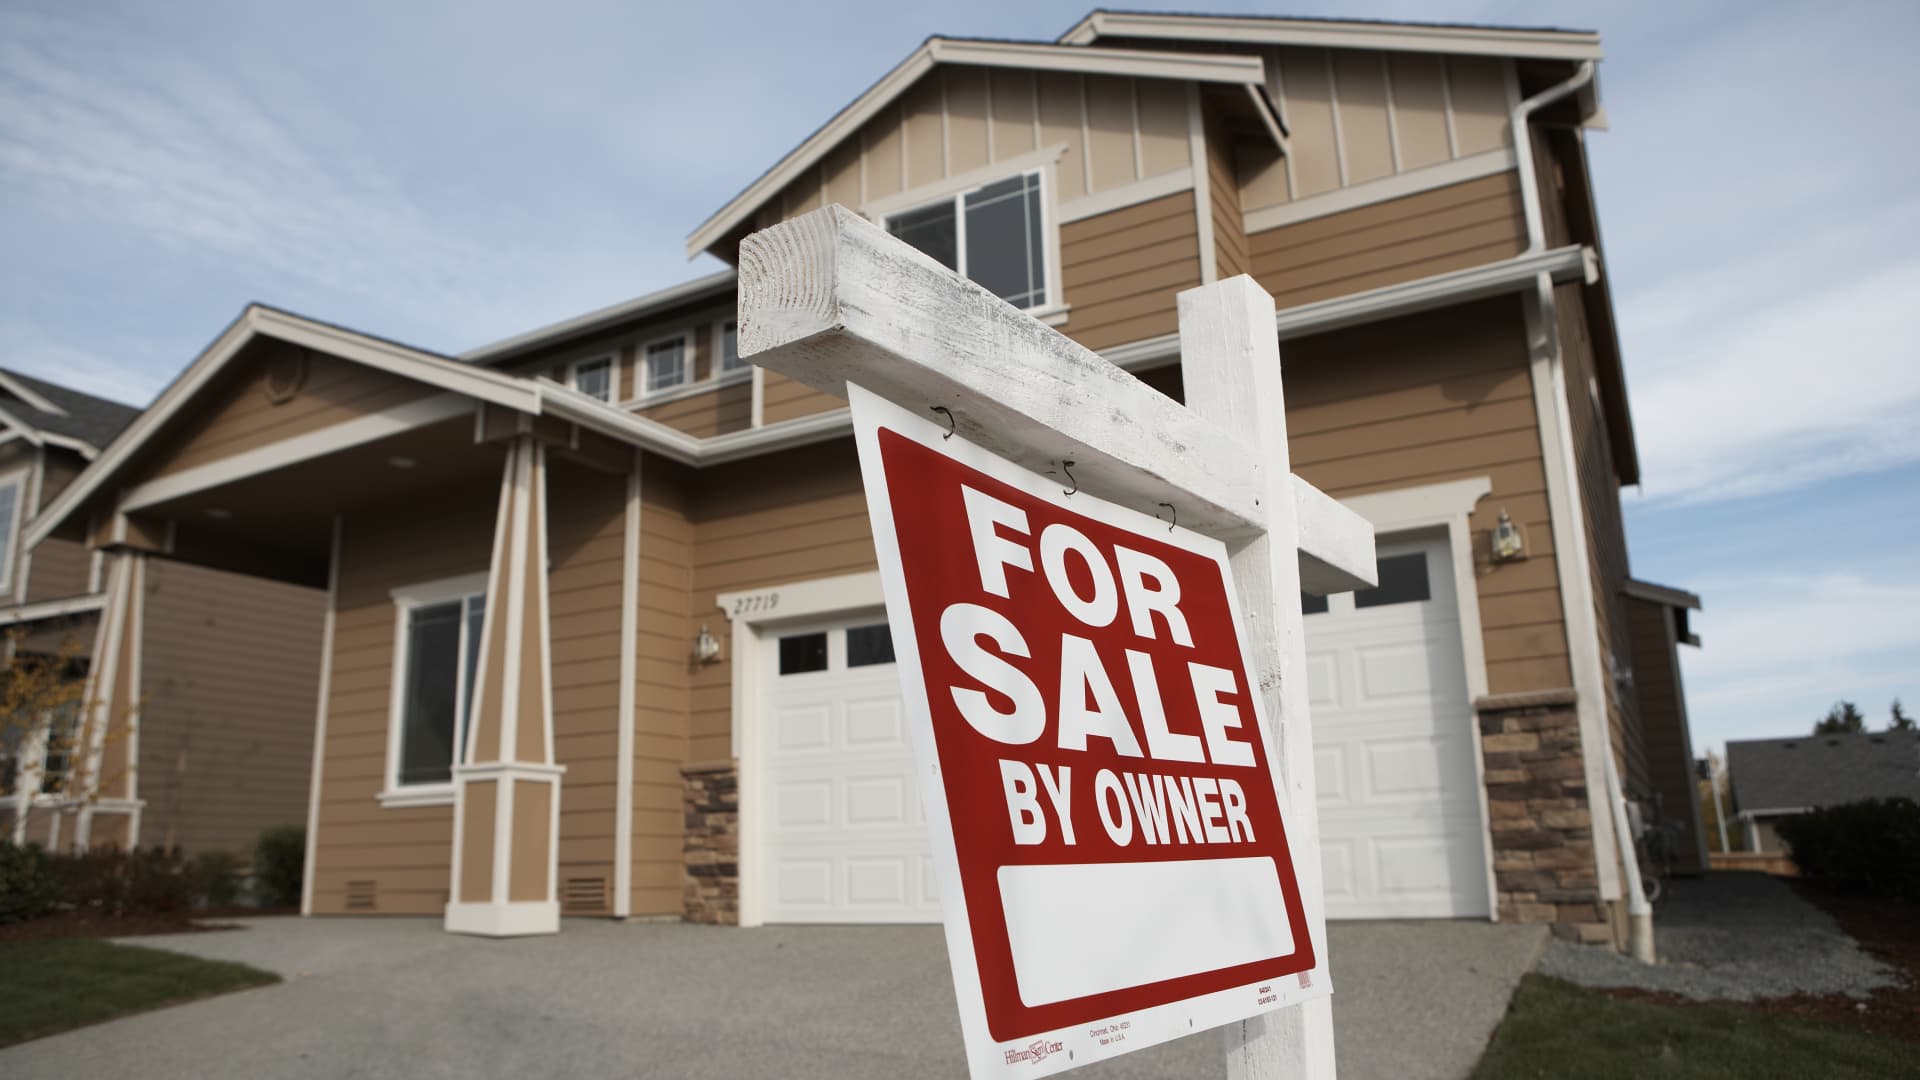 How Does Debt Affect Your Ability To Buy A Home?